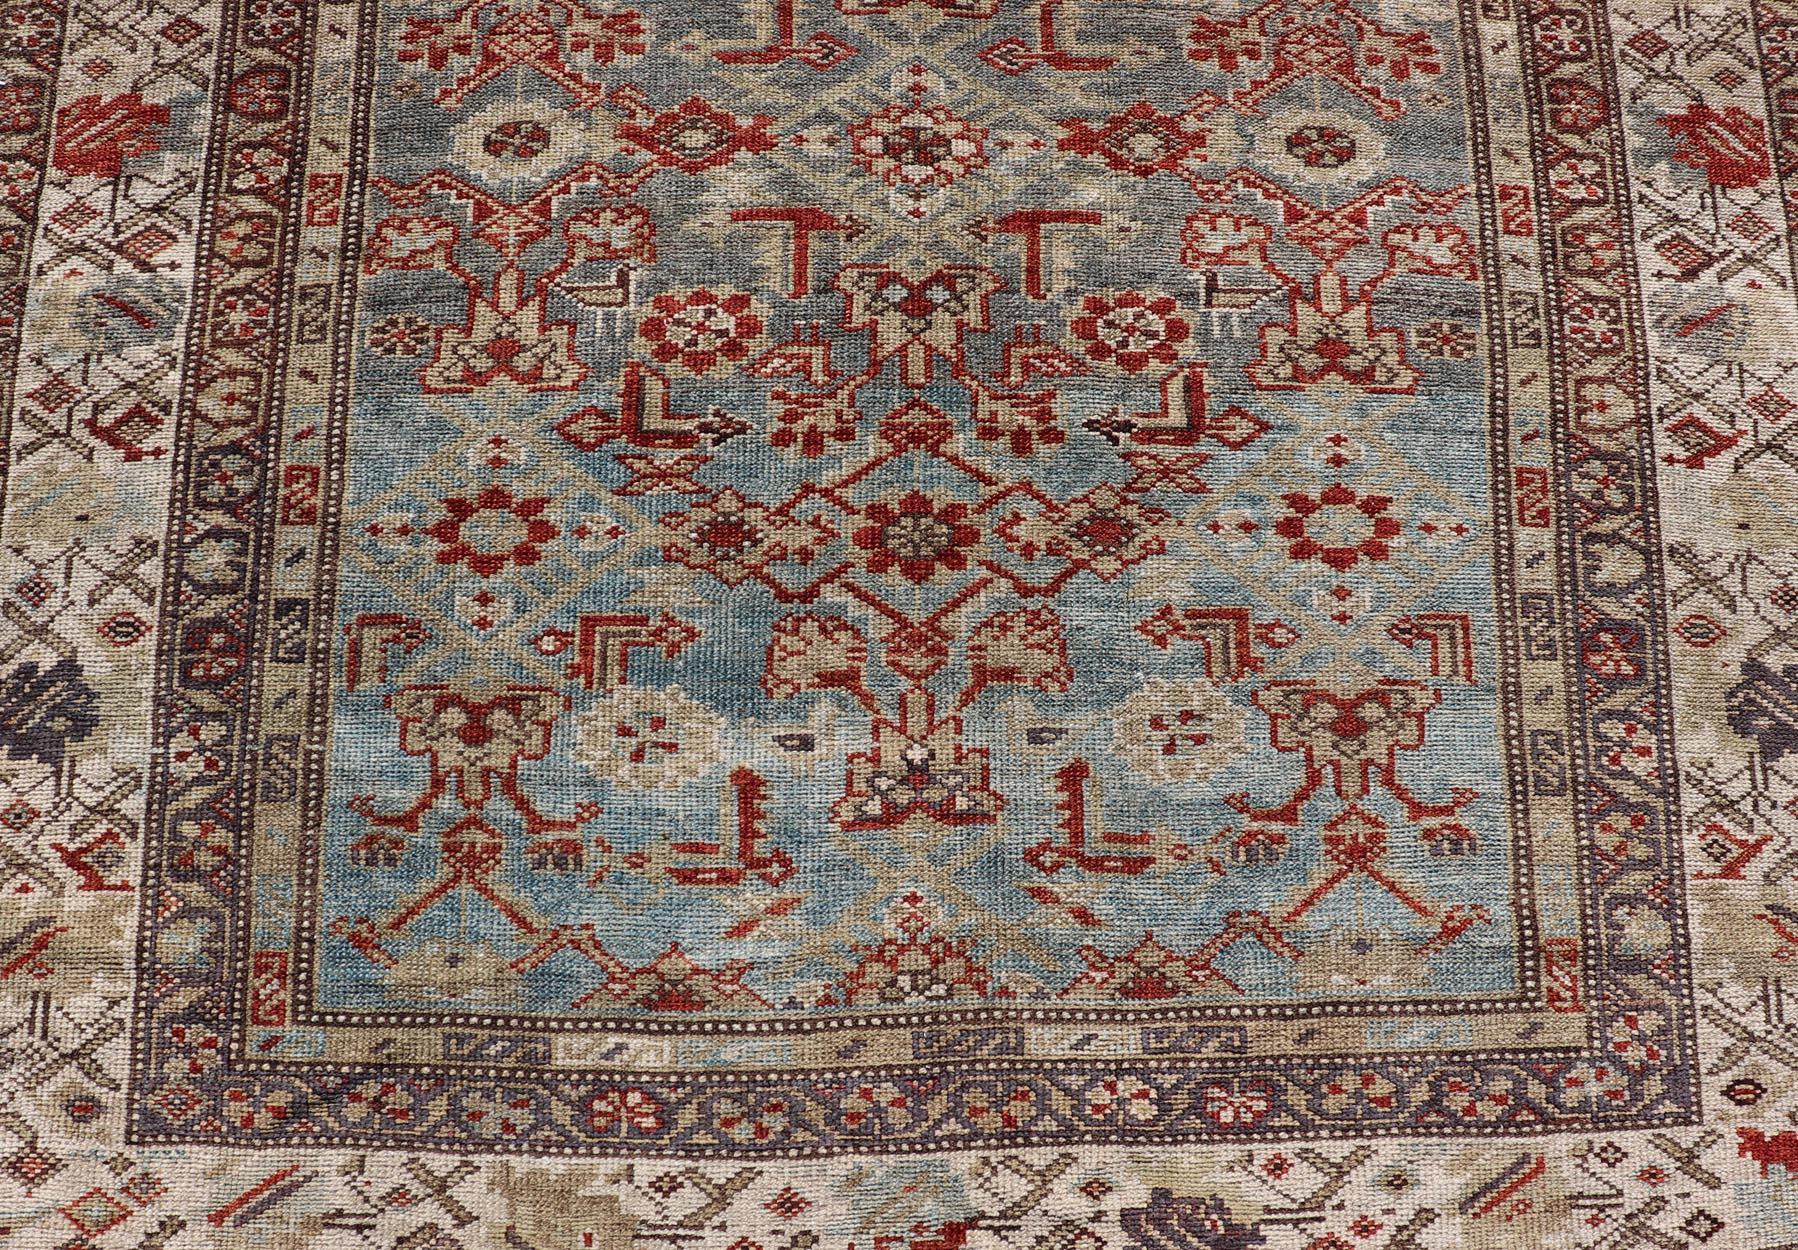 Measures: 4'0 x 6'10 
Antique Persian Malayer Rug with a Blue Field and All-Over Herati Design. Keivan Woven Arts / rug/EMB-22218-15085, country of origin / type: Iran / Malayer, circa 1920.

This antique Persian Malayer rug (circa 1920s) features a